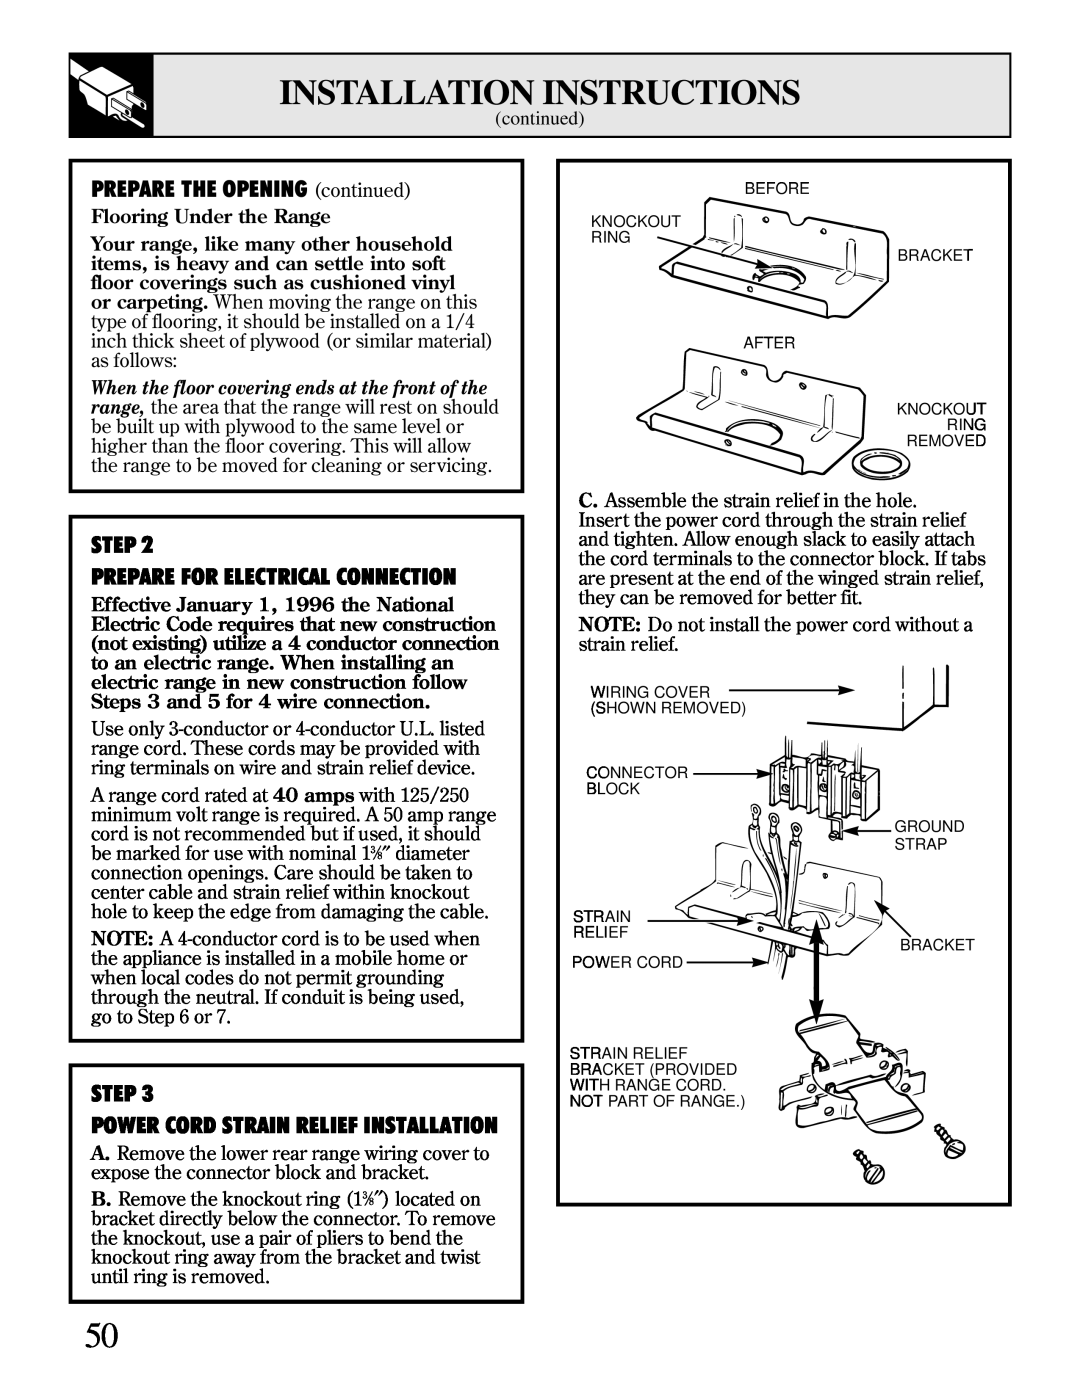 GE JBP95 warranty PREPARE THE OPENING continued, Step, Prepare For Electrical Connection, Installation Instructions 